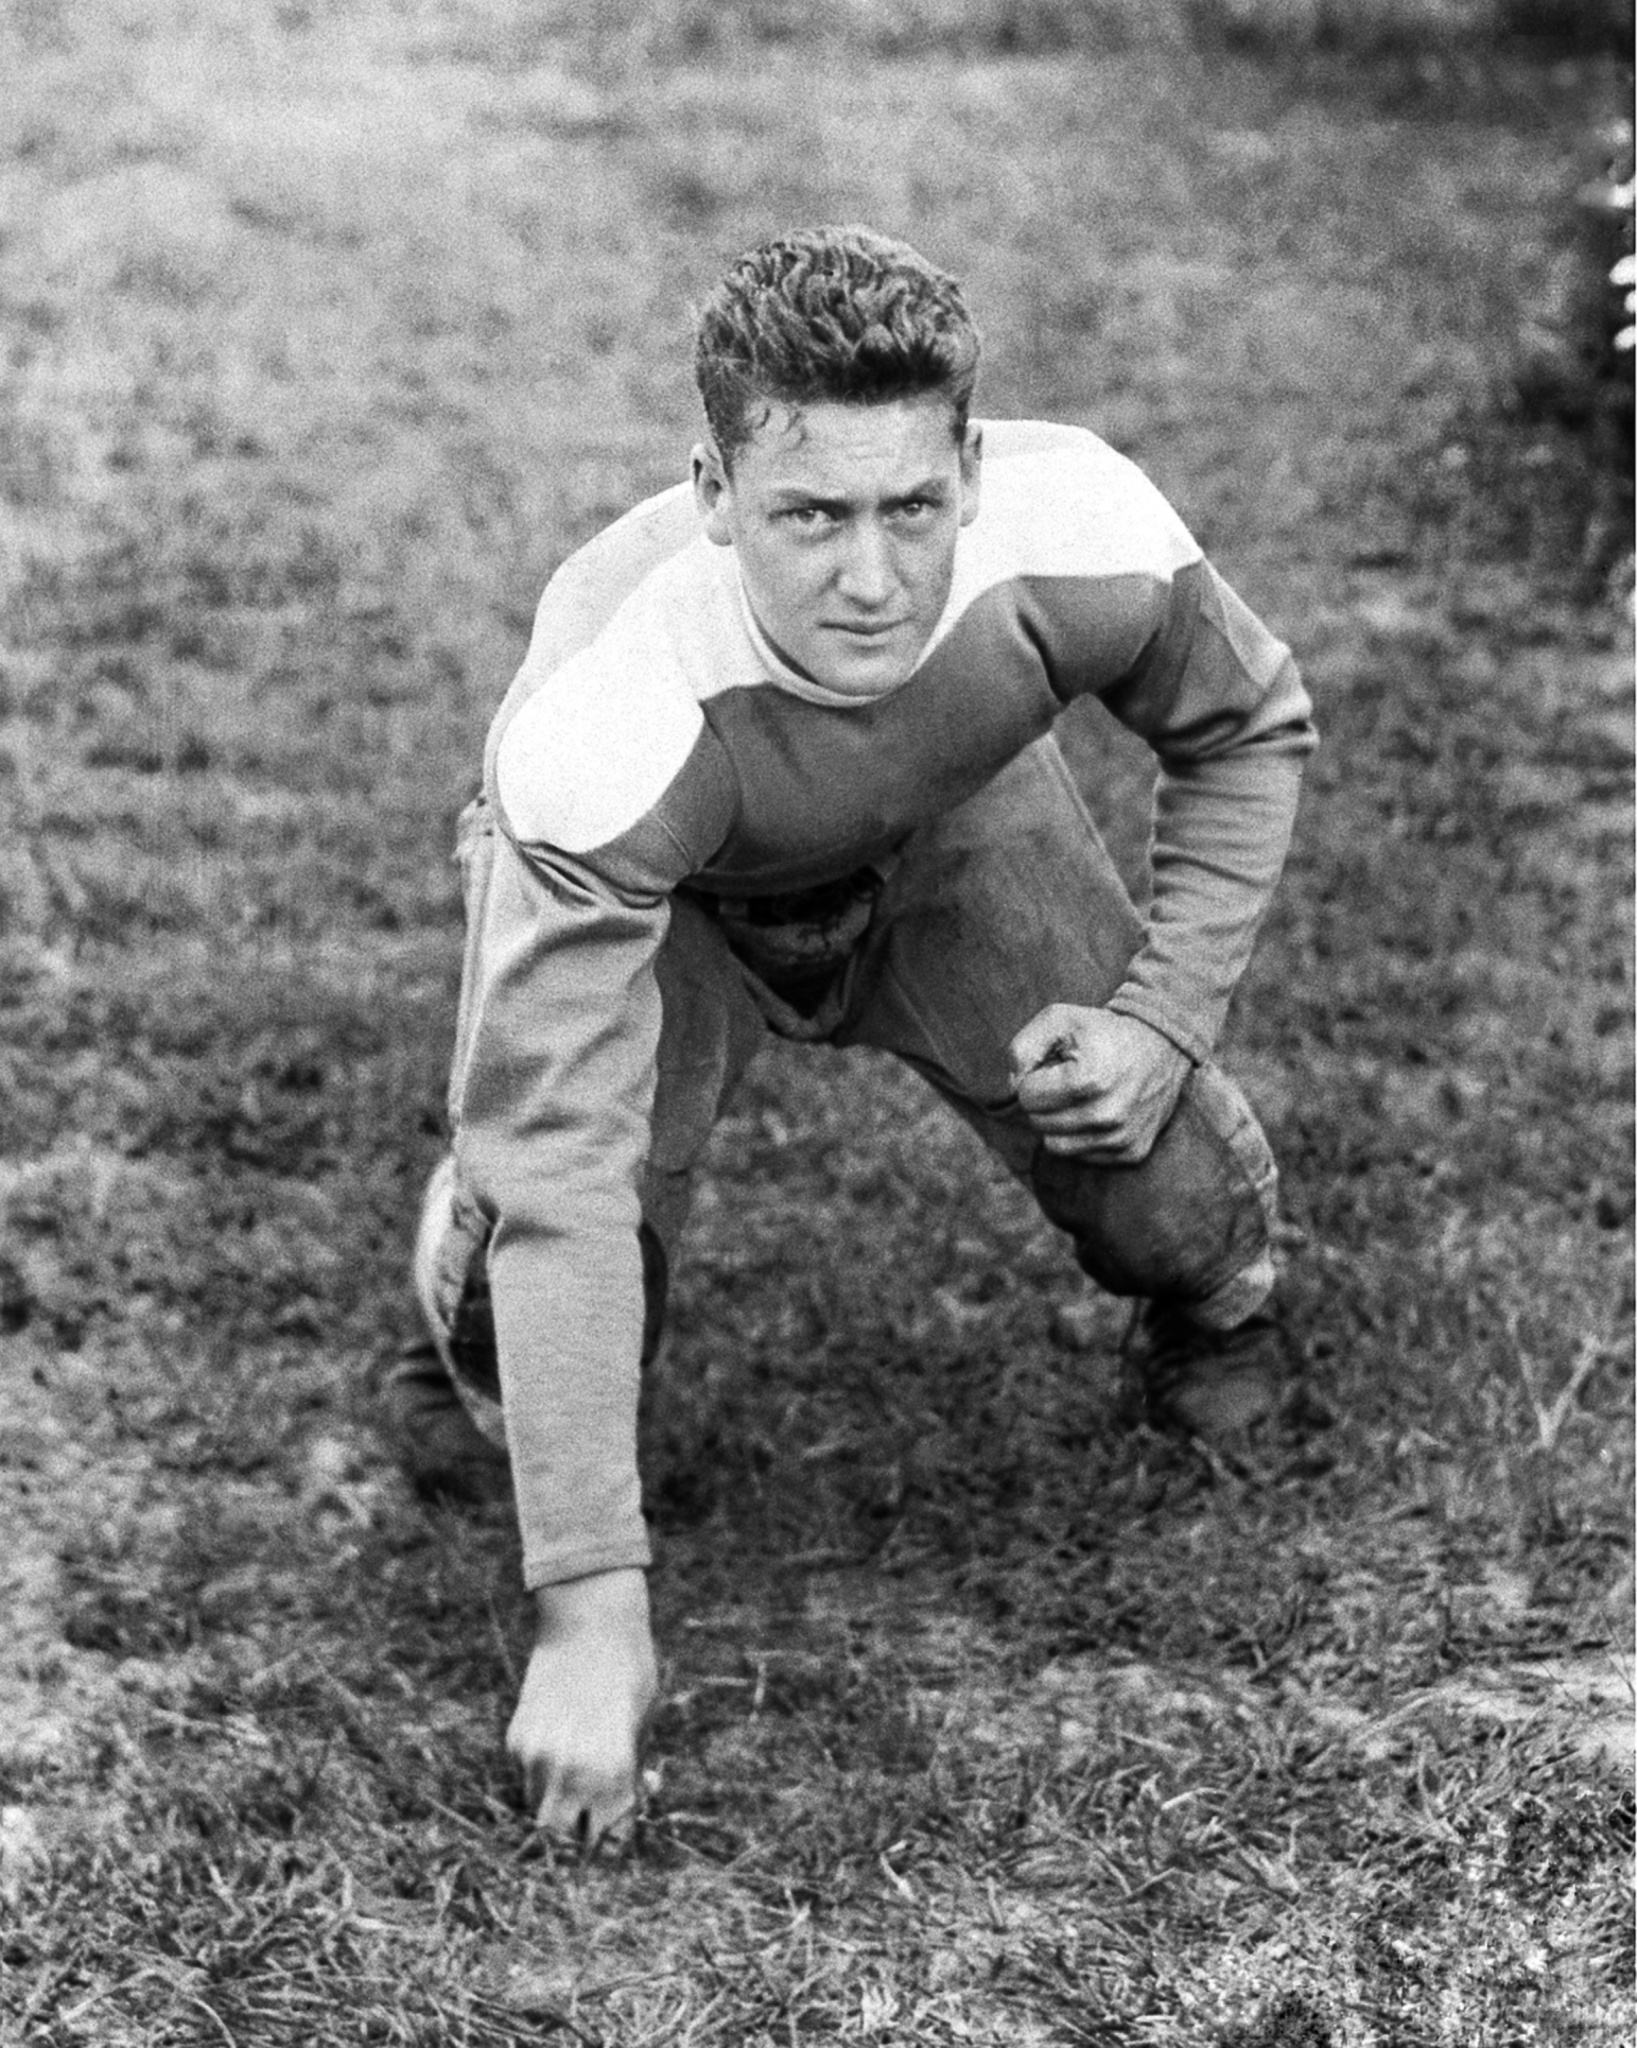 Scan of Photo of R K Johnson (Lefty) - football player in FL - 1930